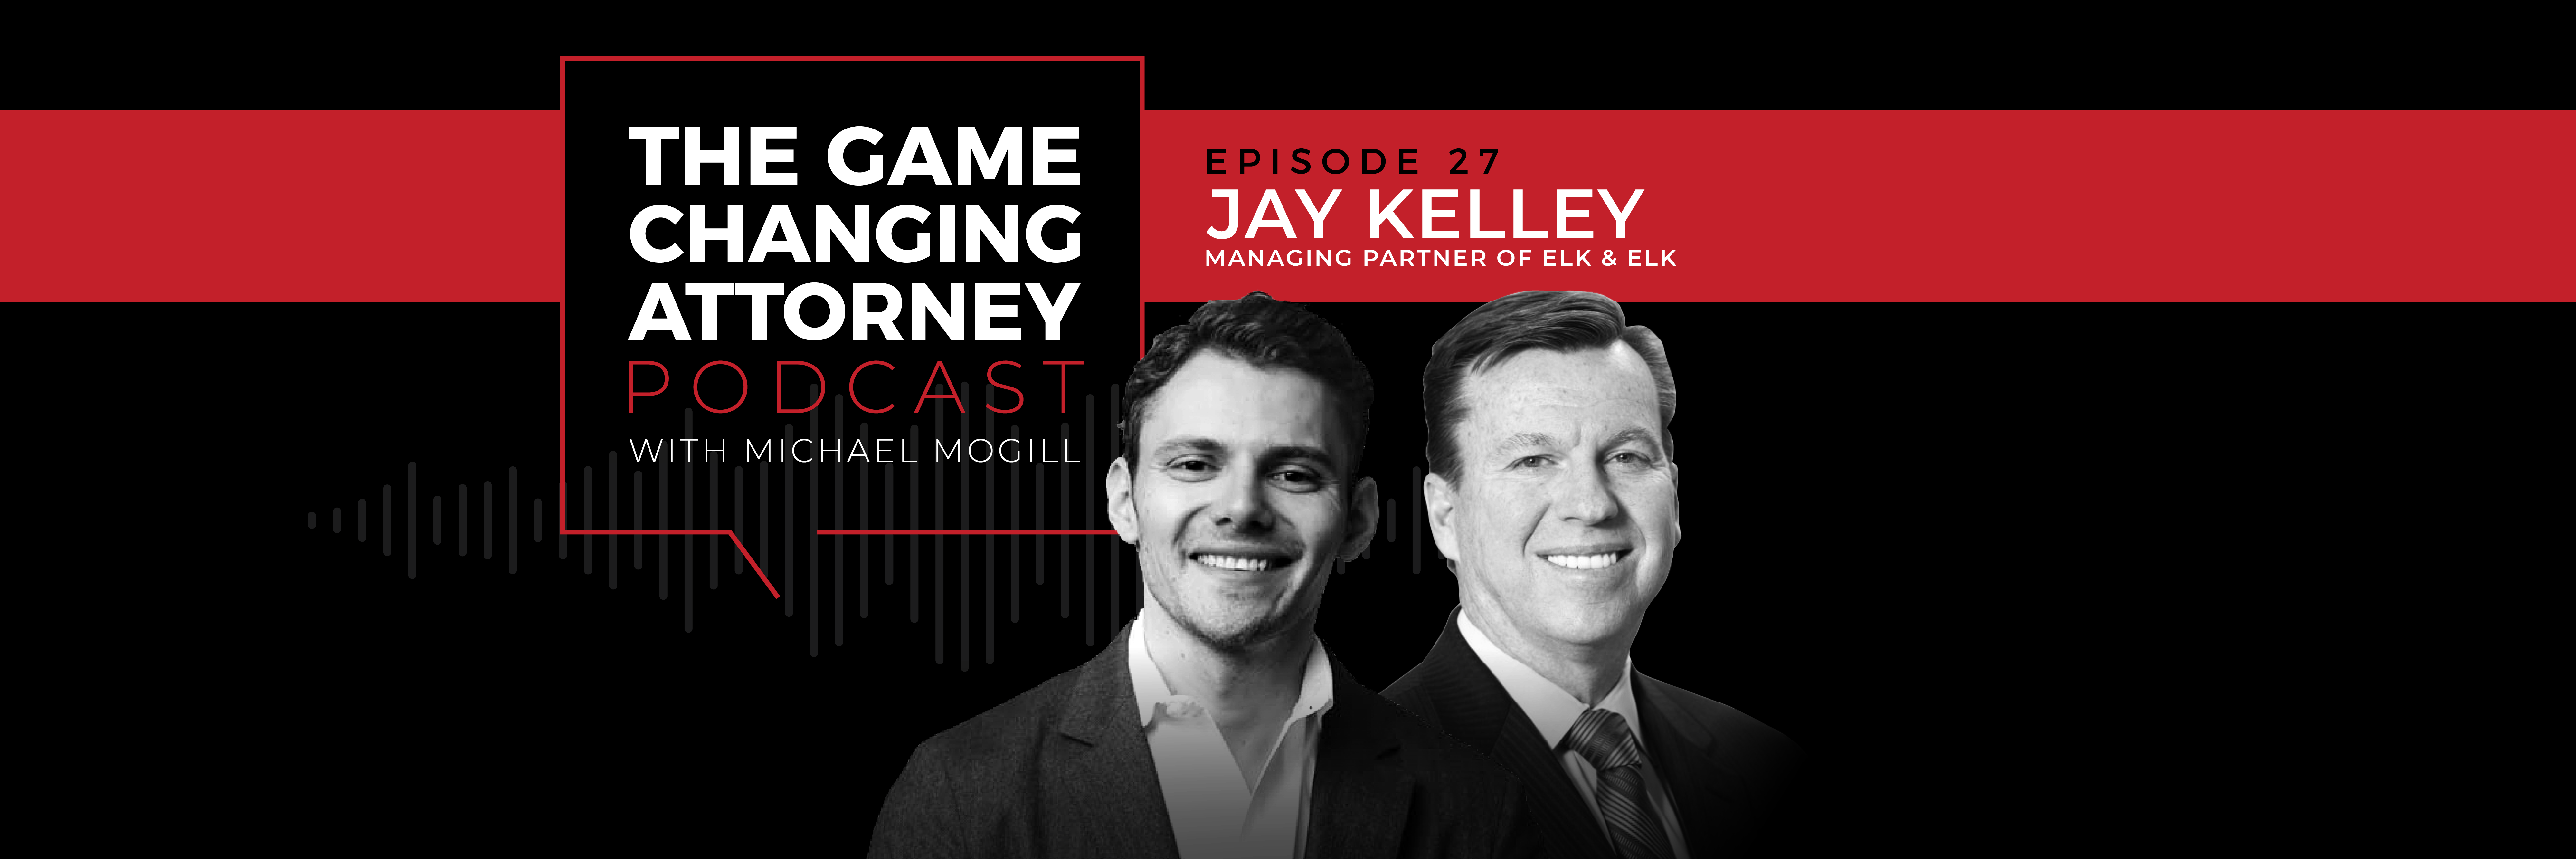 Jay Kelley - The Game Changing Attorney Podcast - Desktop